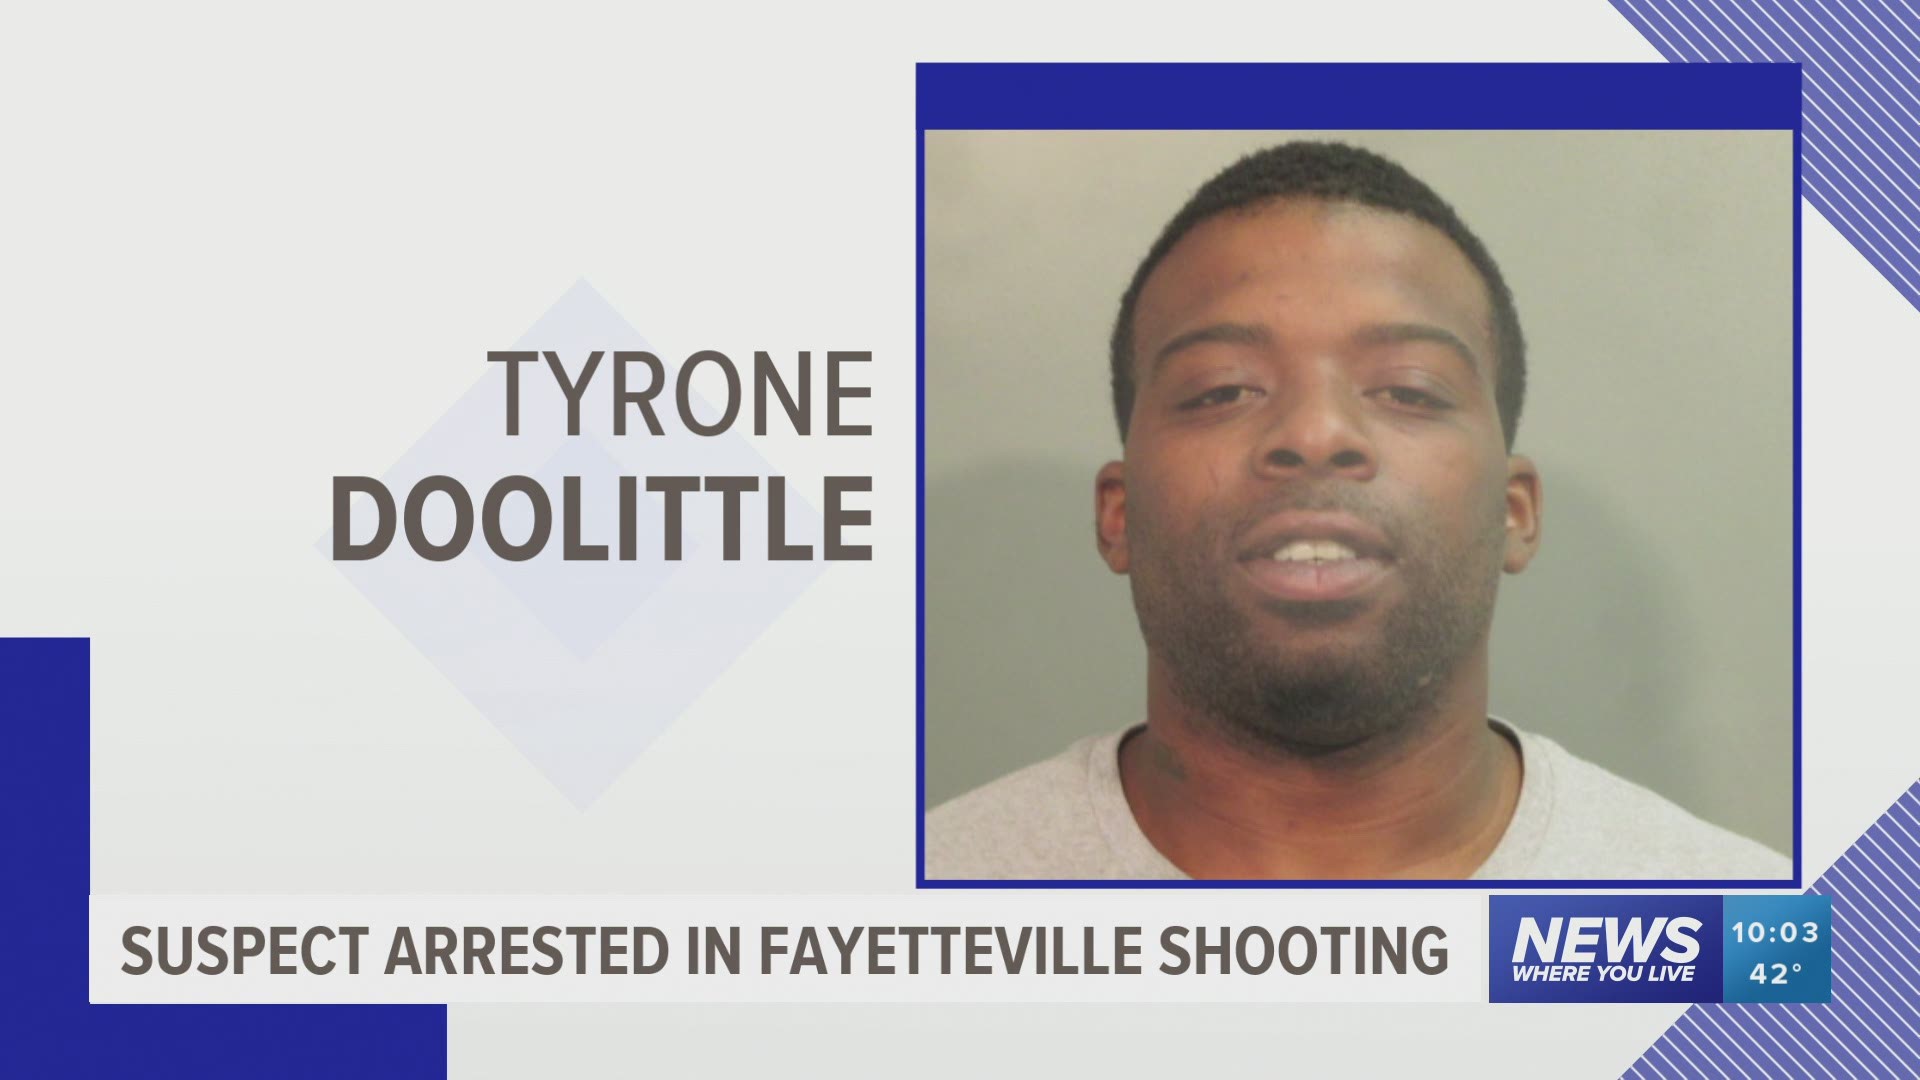 Tyrone Doolittle, 29, was arrested in connection to the shooting Saturday morning (Jan. 23).